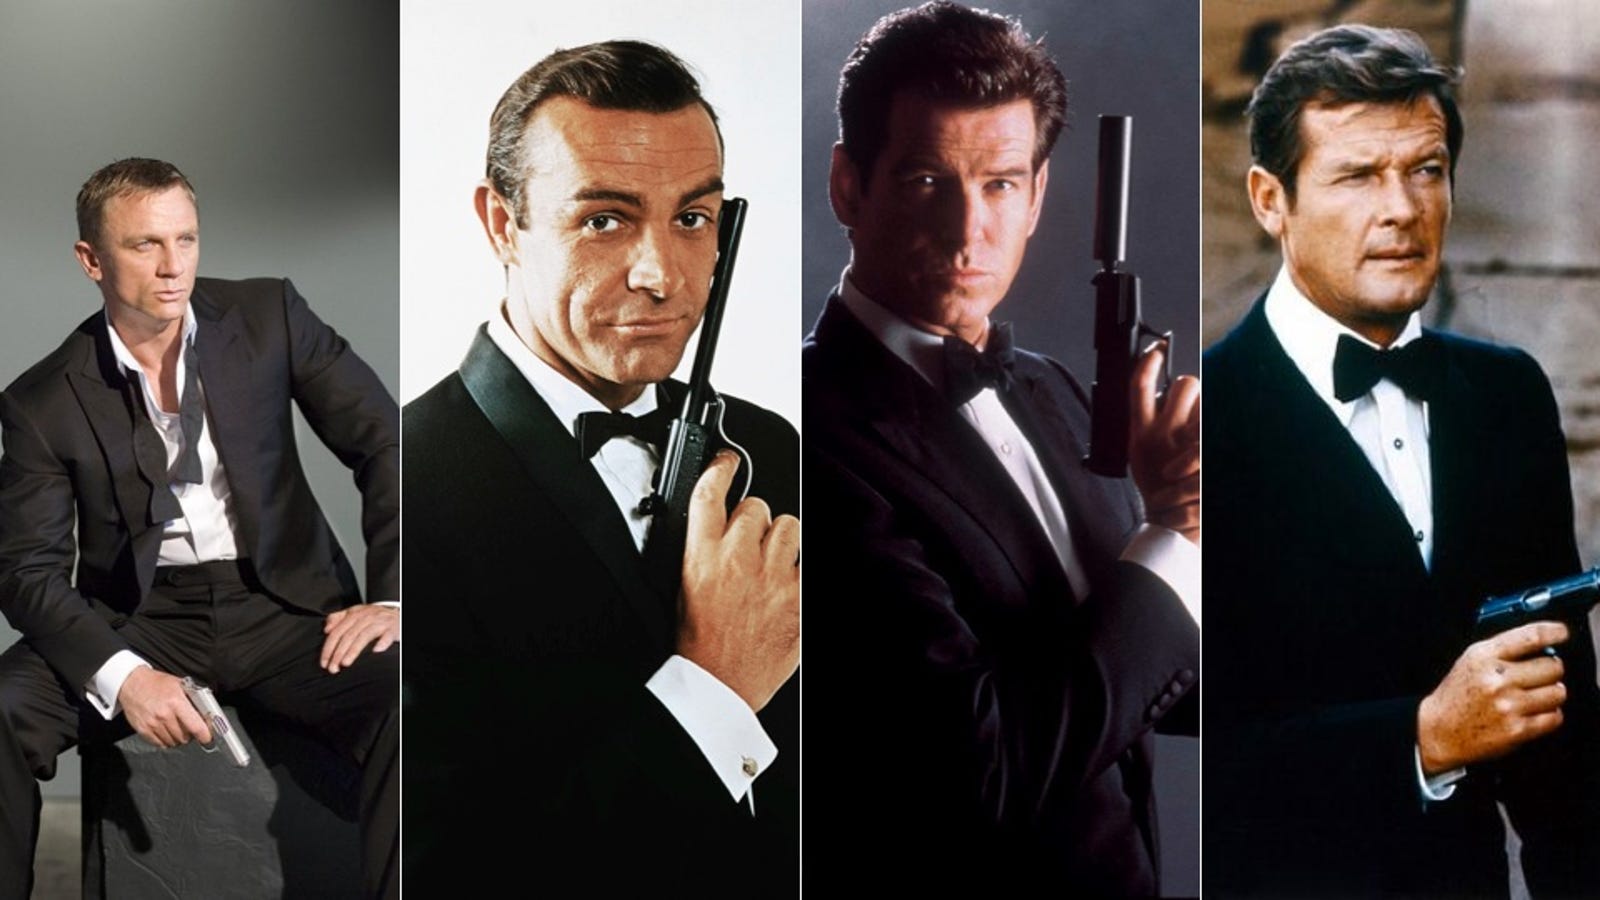 Get Ready to Find Out What James Bond Smells Like